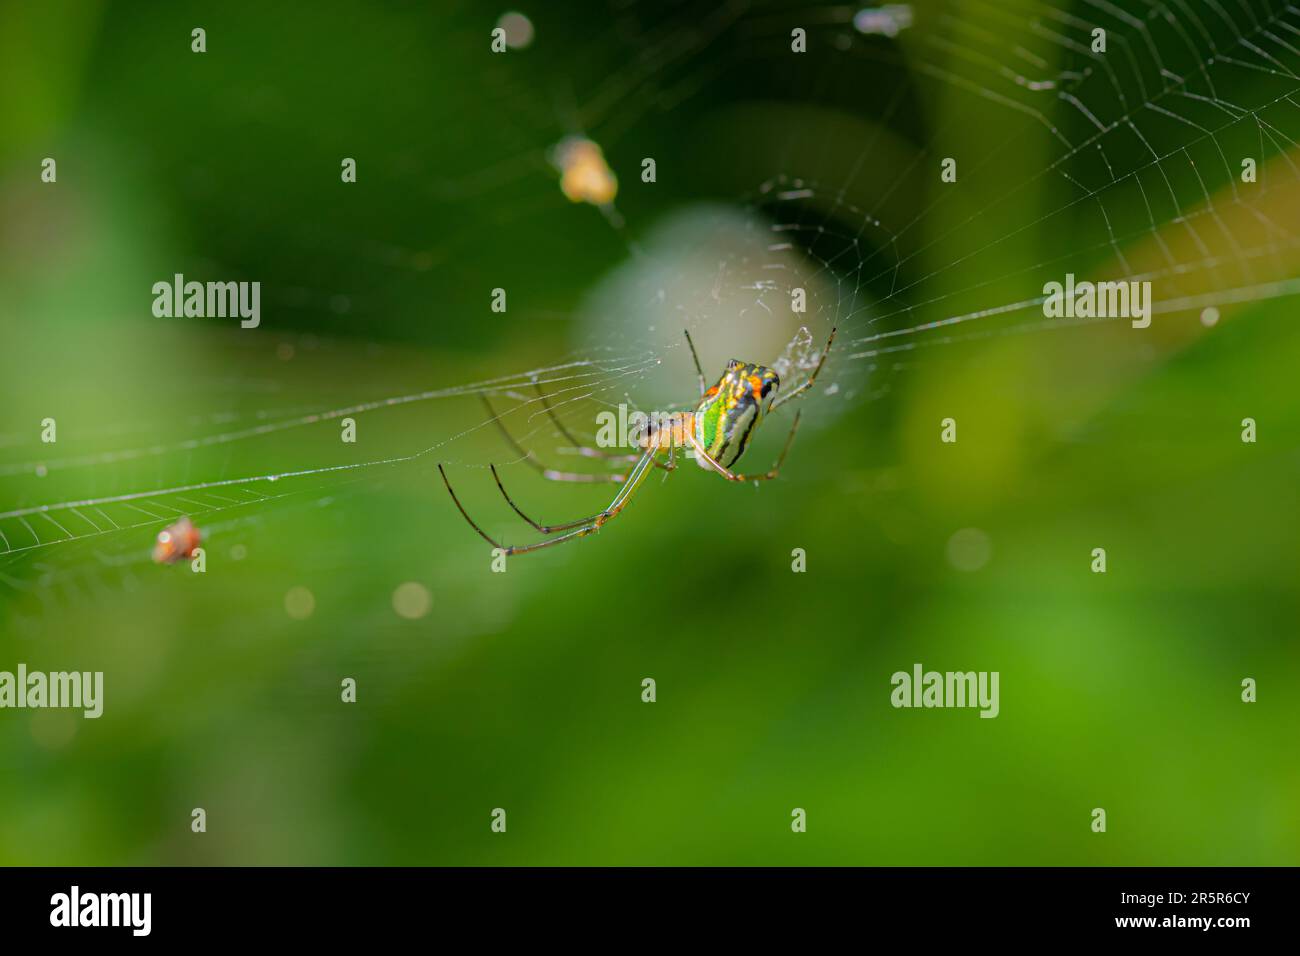 A small brown spider with long legs perched on a delicate web in a lush green environment Stock Photo